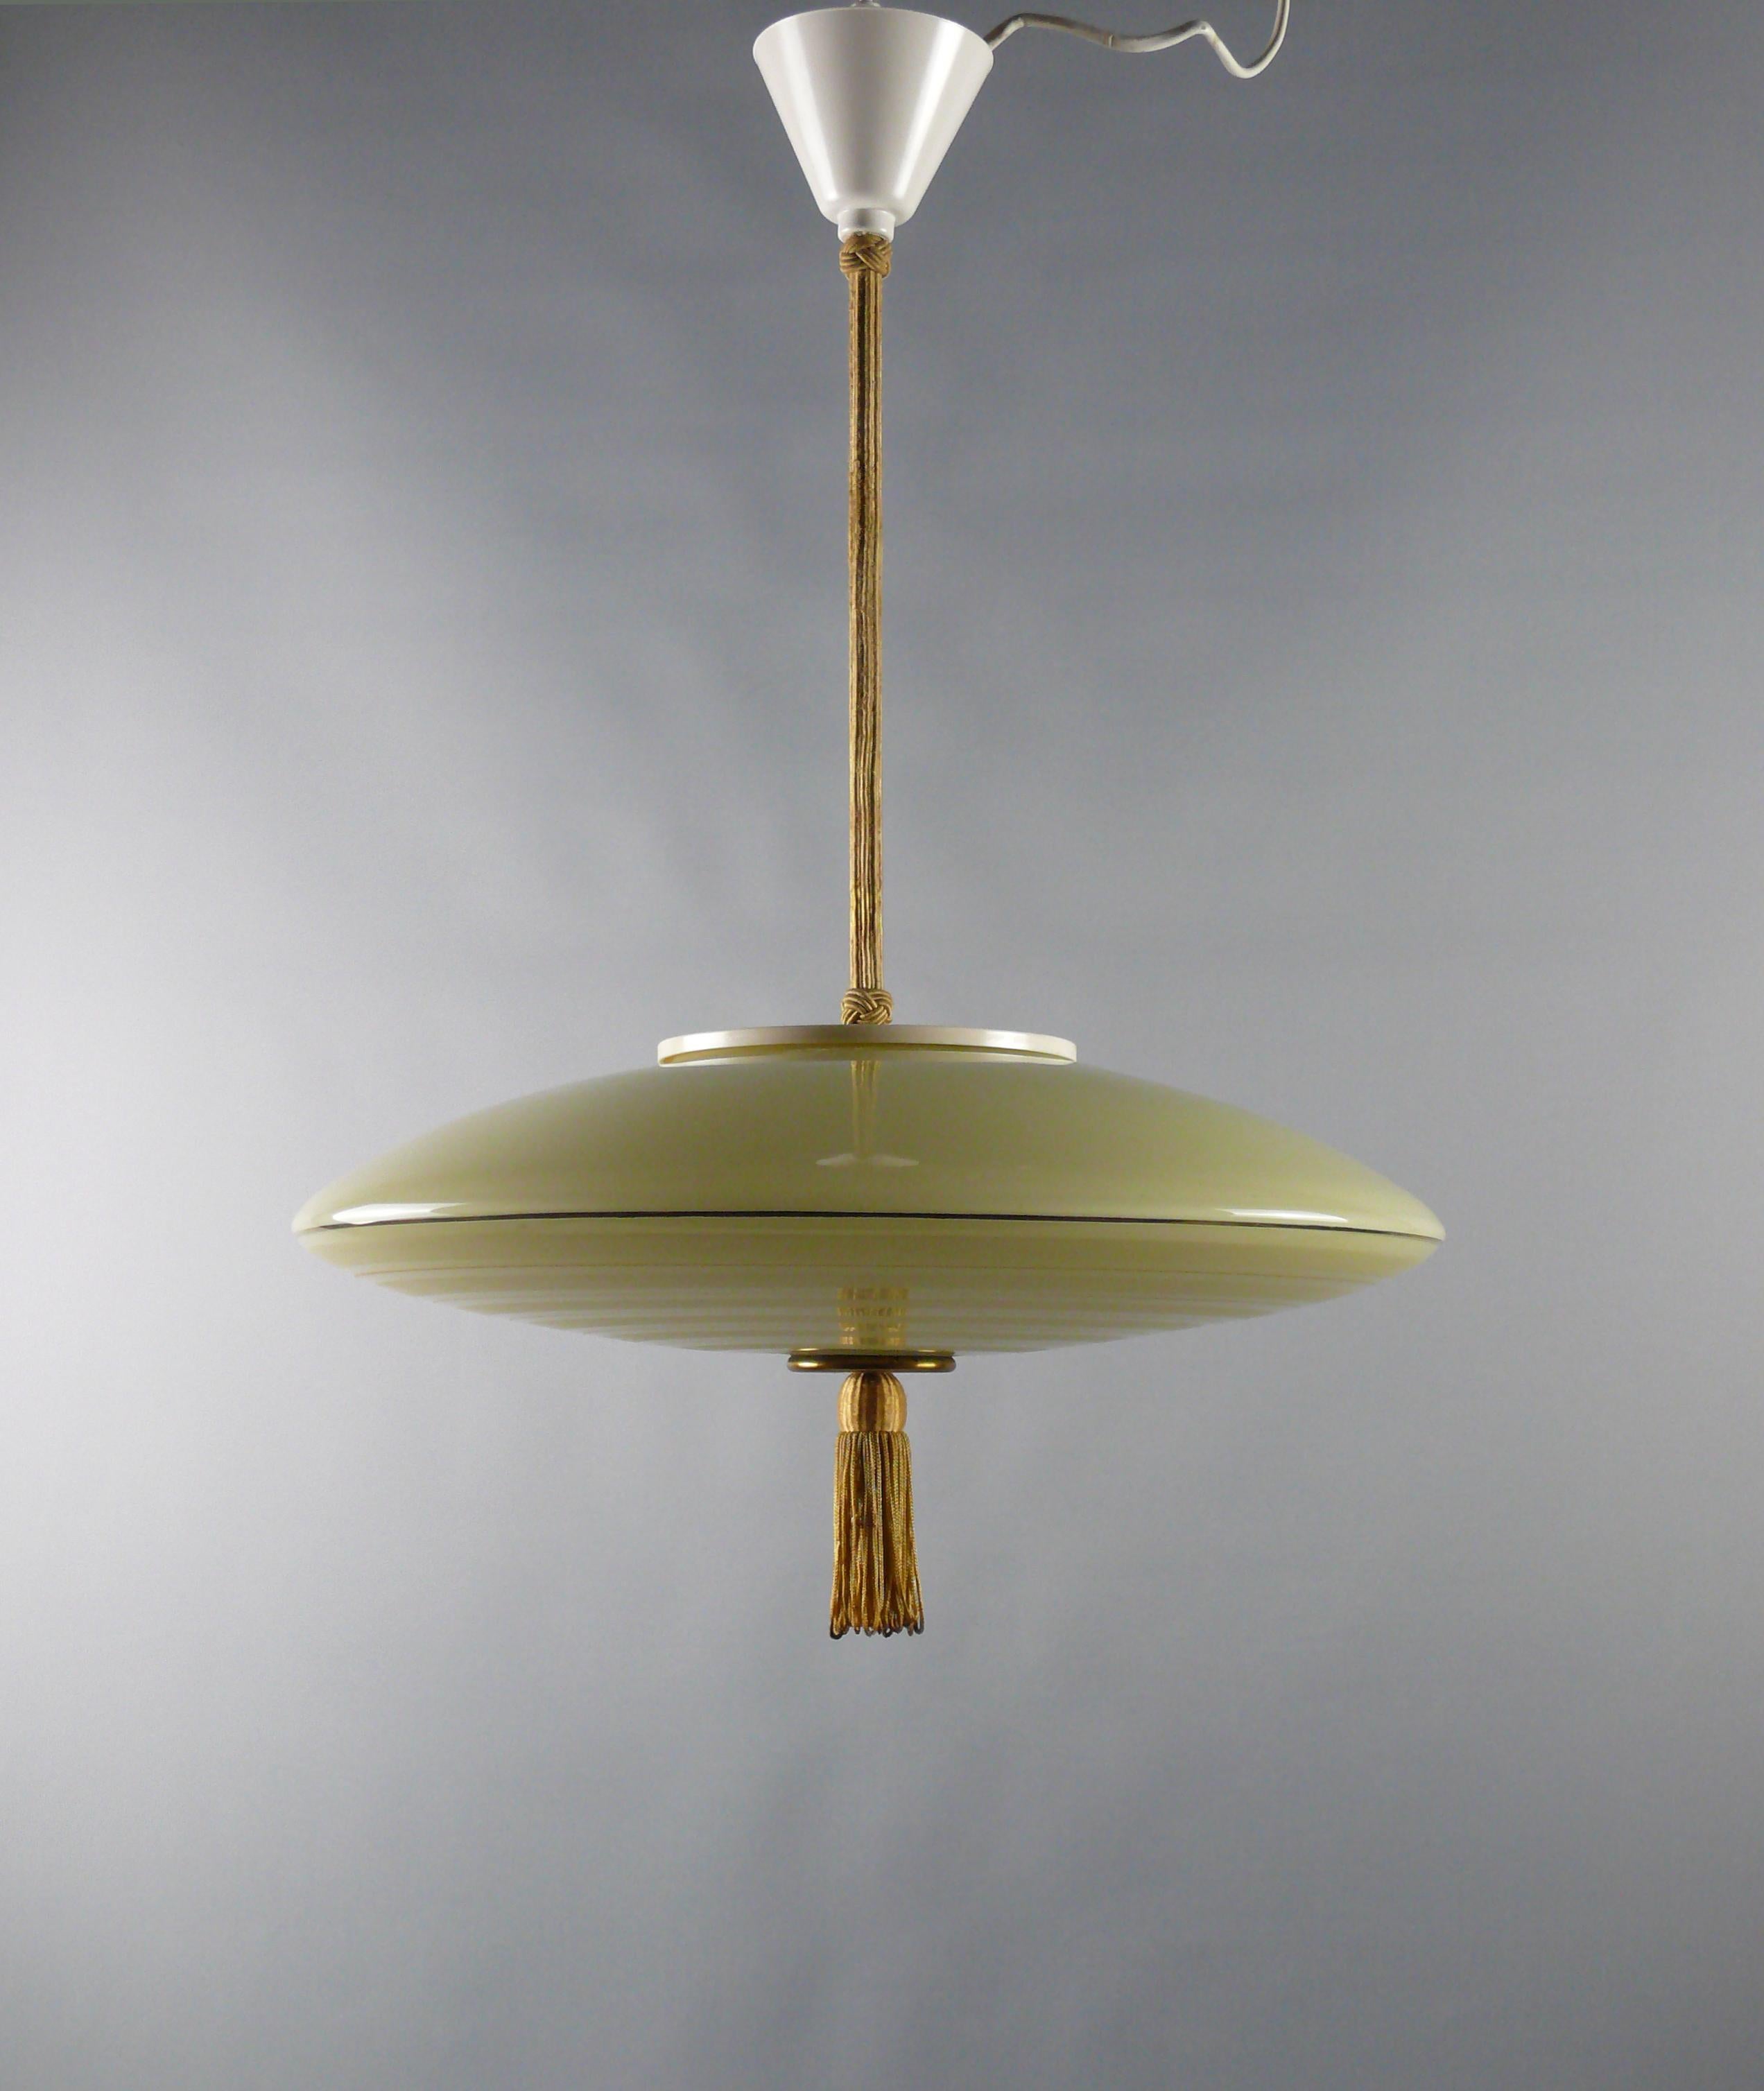 Large rod pendant light from the 1930s - 1950s with a beige glass shade, coated rod and plastic suspension.

The ufo-shaped glass shade has radial-shaped, gold-colored decorative strips and frosted areas. The lower end button is made of brass and